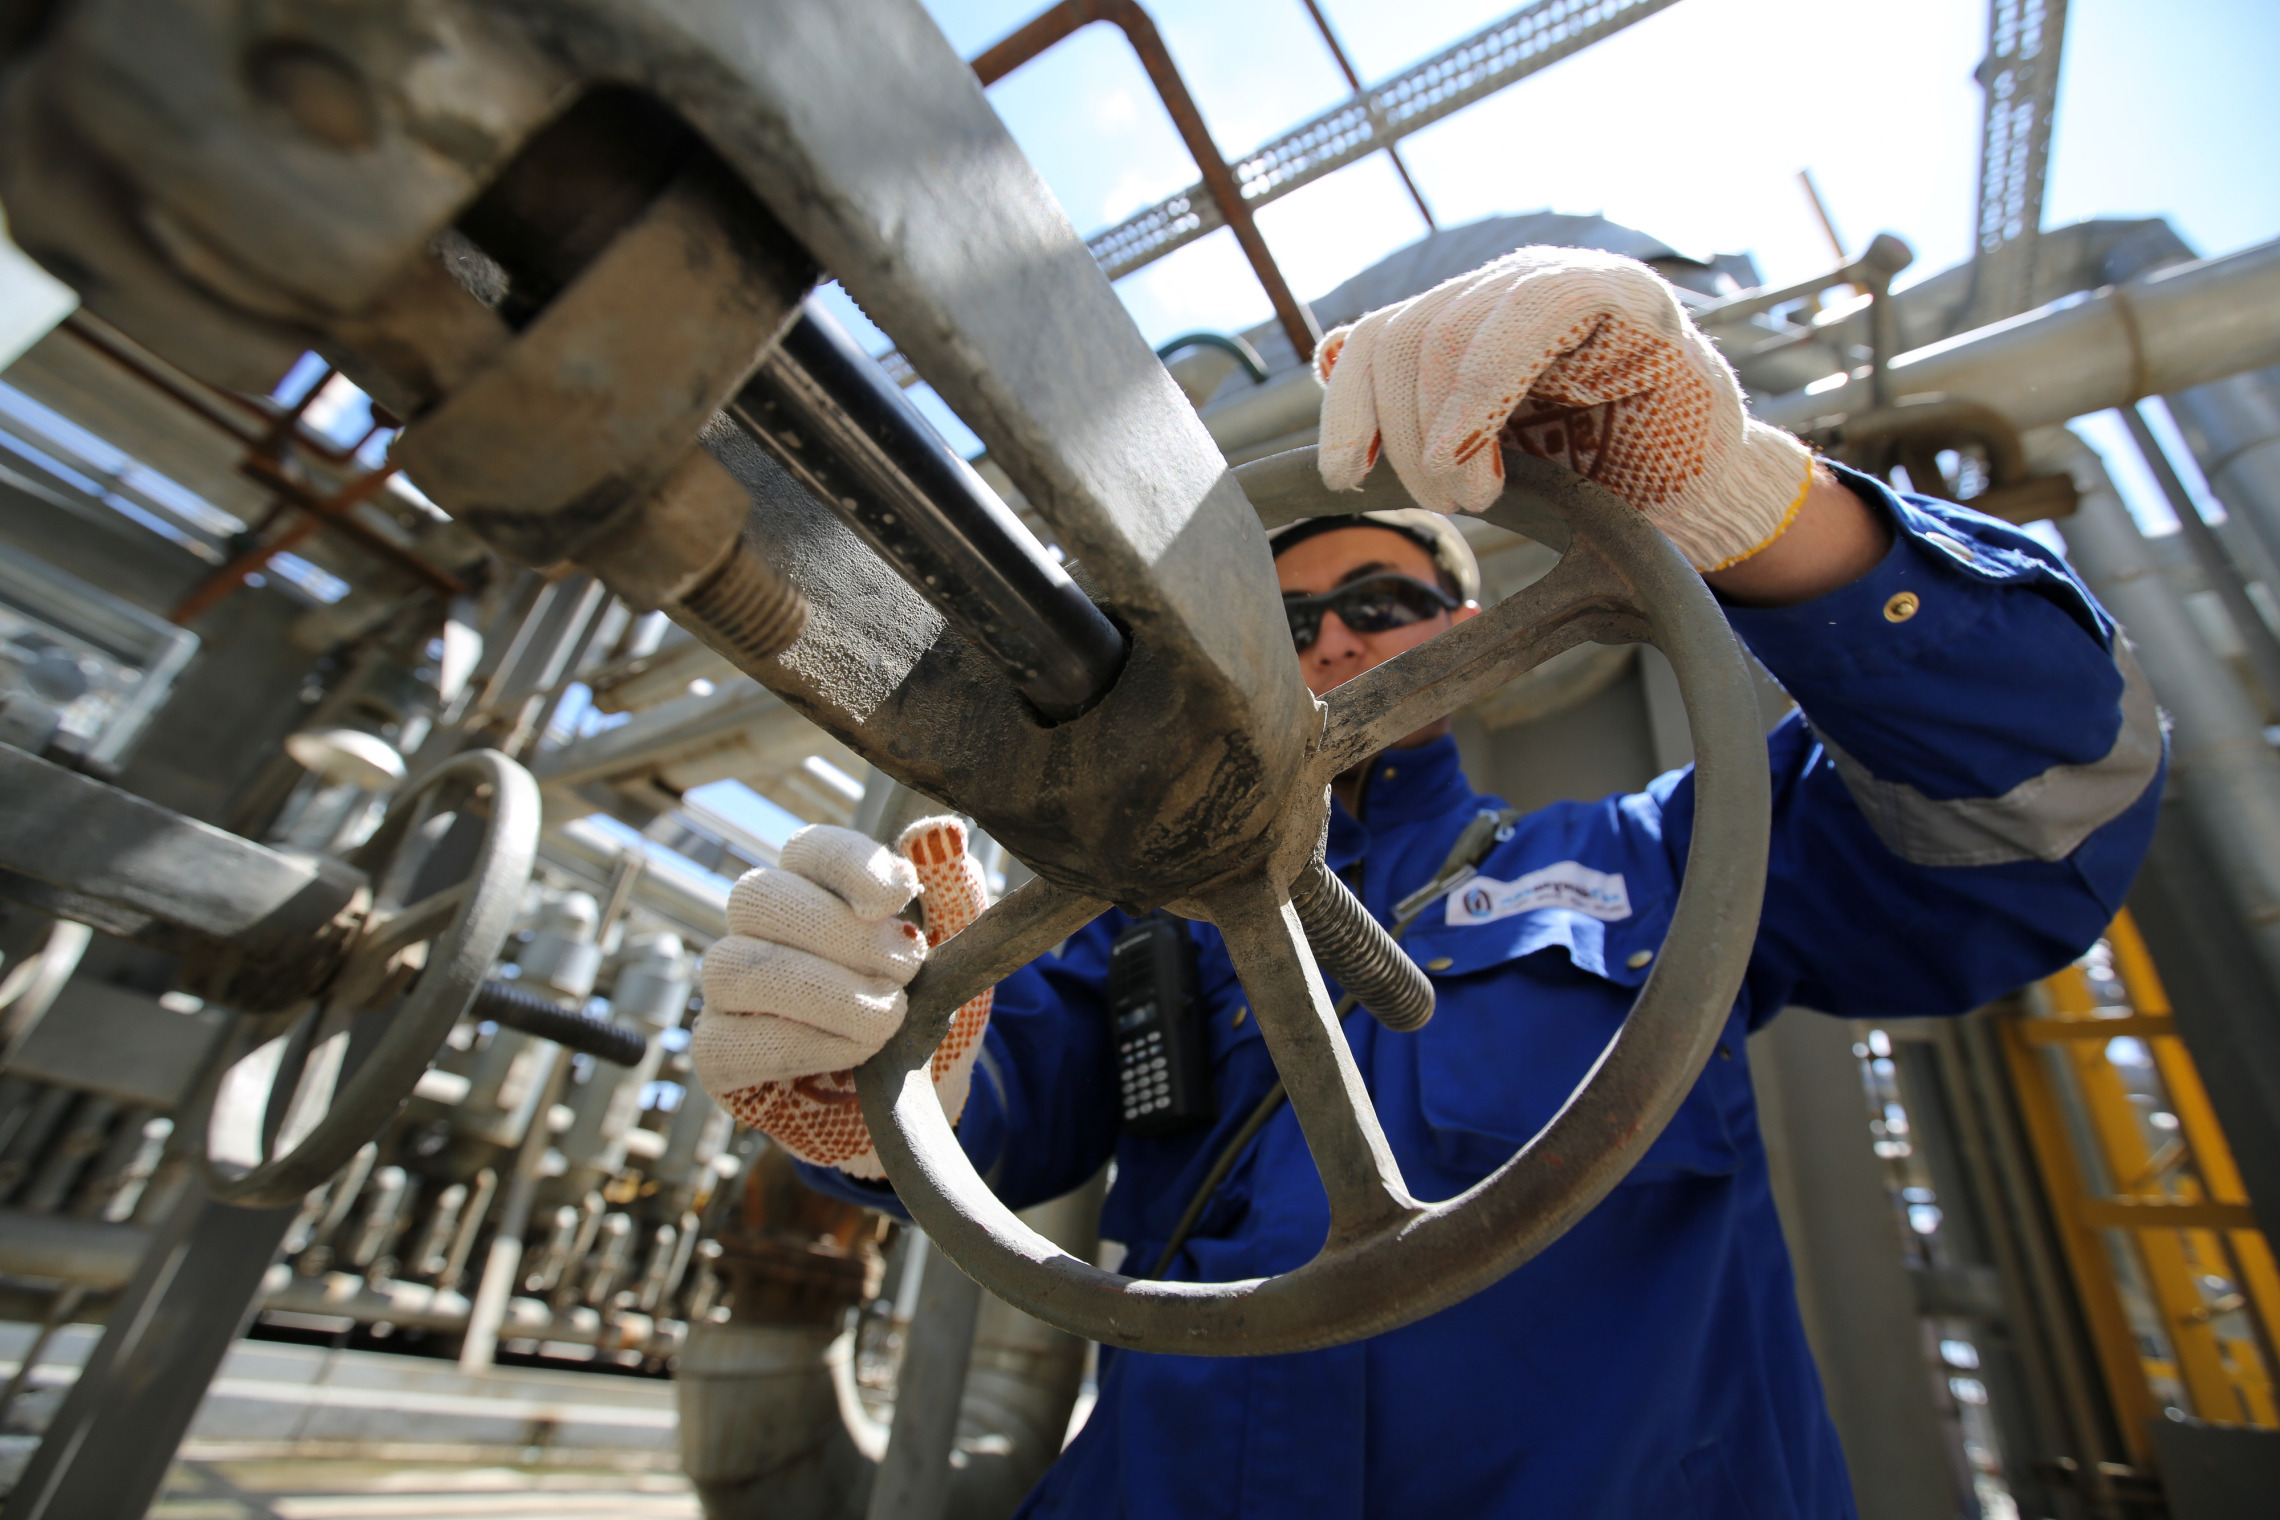 A worker operates a control valve on pipework at the Atyrau oil refinery, operated by KazMunaiGas National Co., in Atyrau, Kazakhstan, on Thursday, July 2, 2015.  Photographer: Andrey Rudakov/Bloomberg